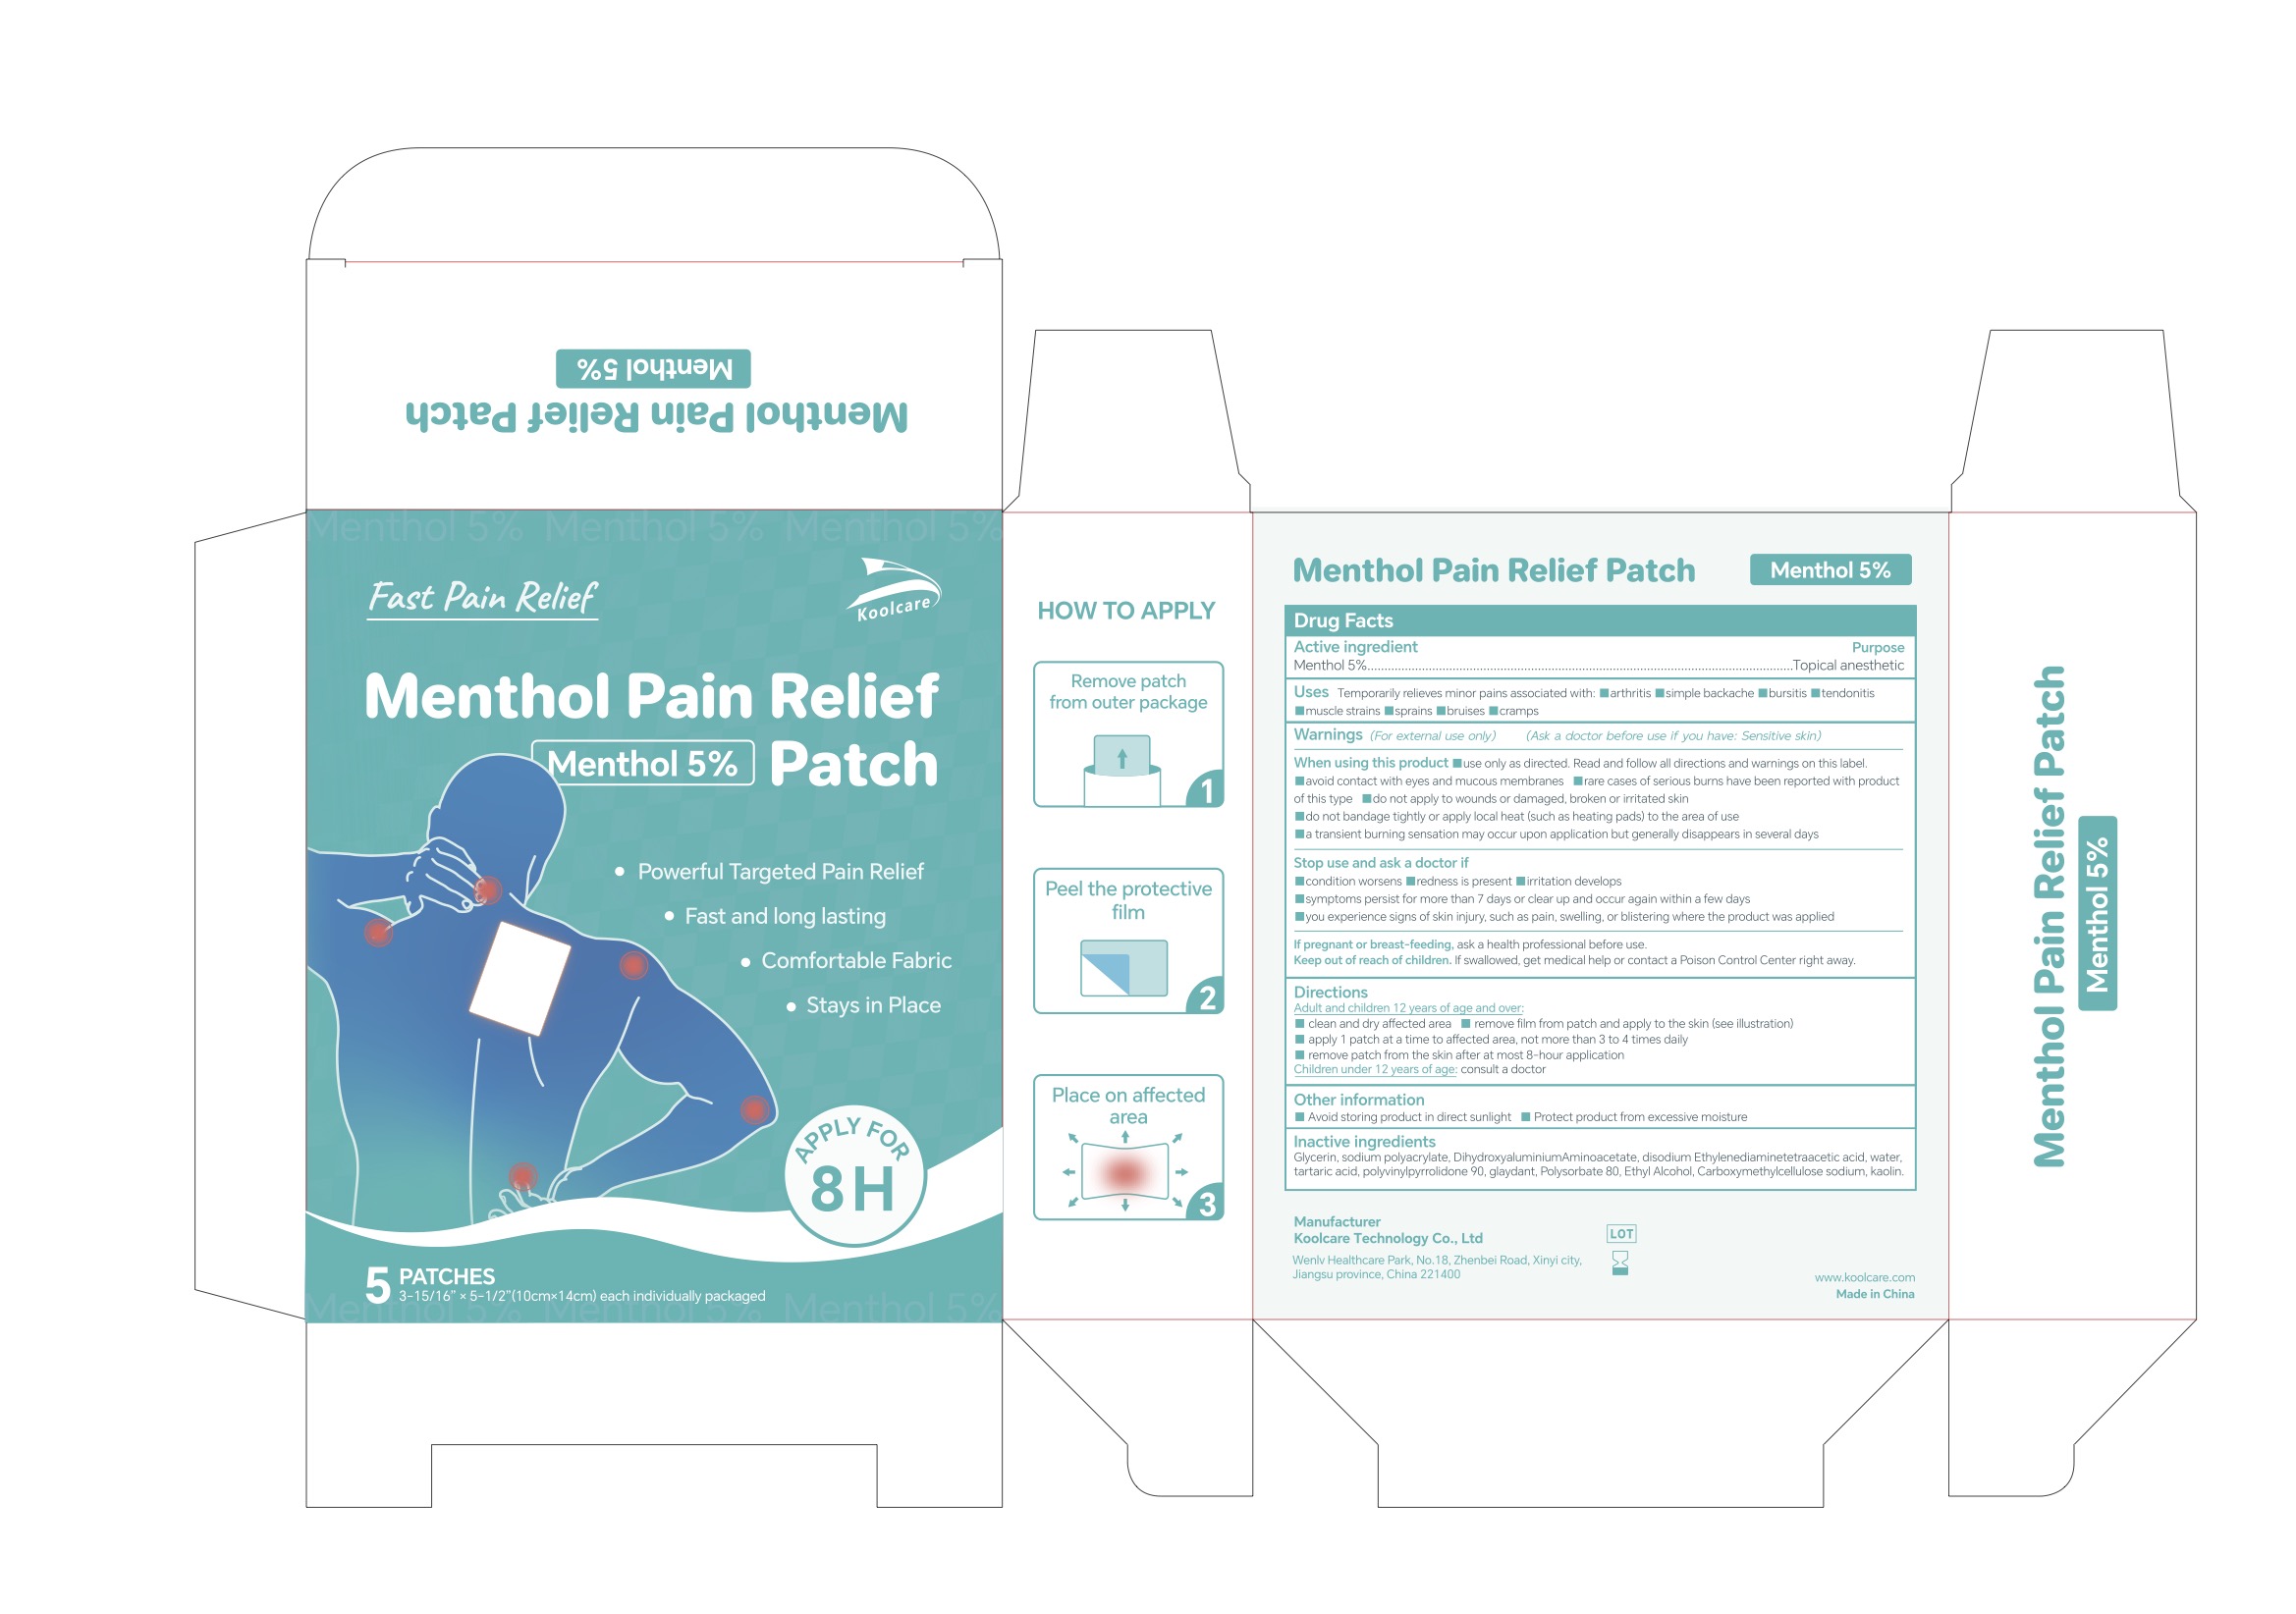 5% Menthol Pain Relief Patch NDC: <a href=/NDC/84205-004-01>84205-004-01</a>